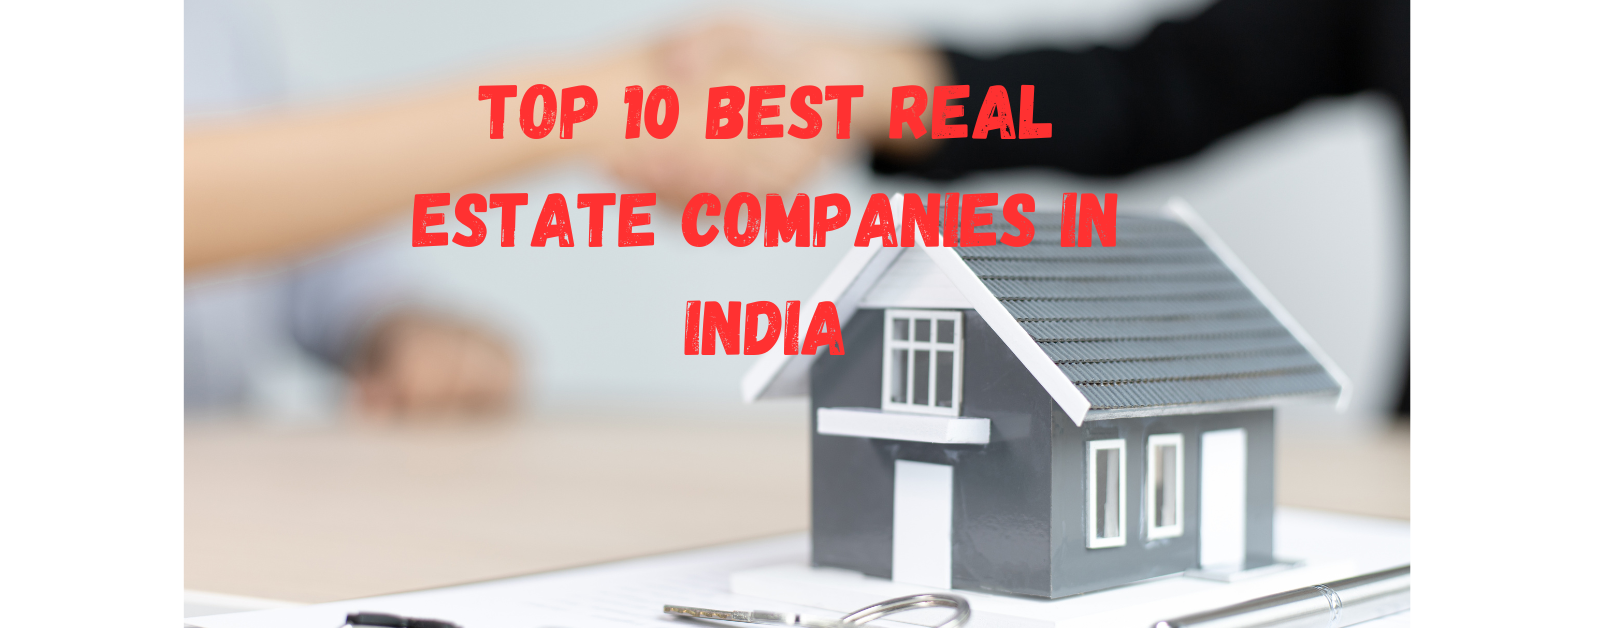 Top 10 Best Real Estate Companies In India